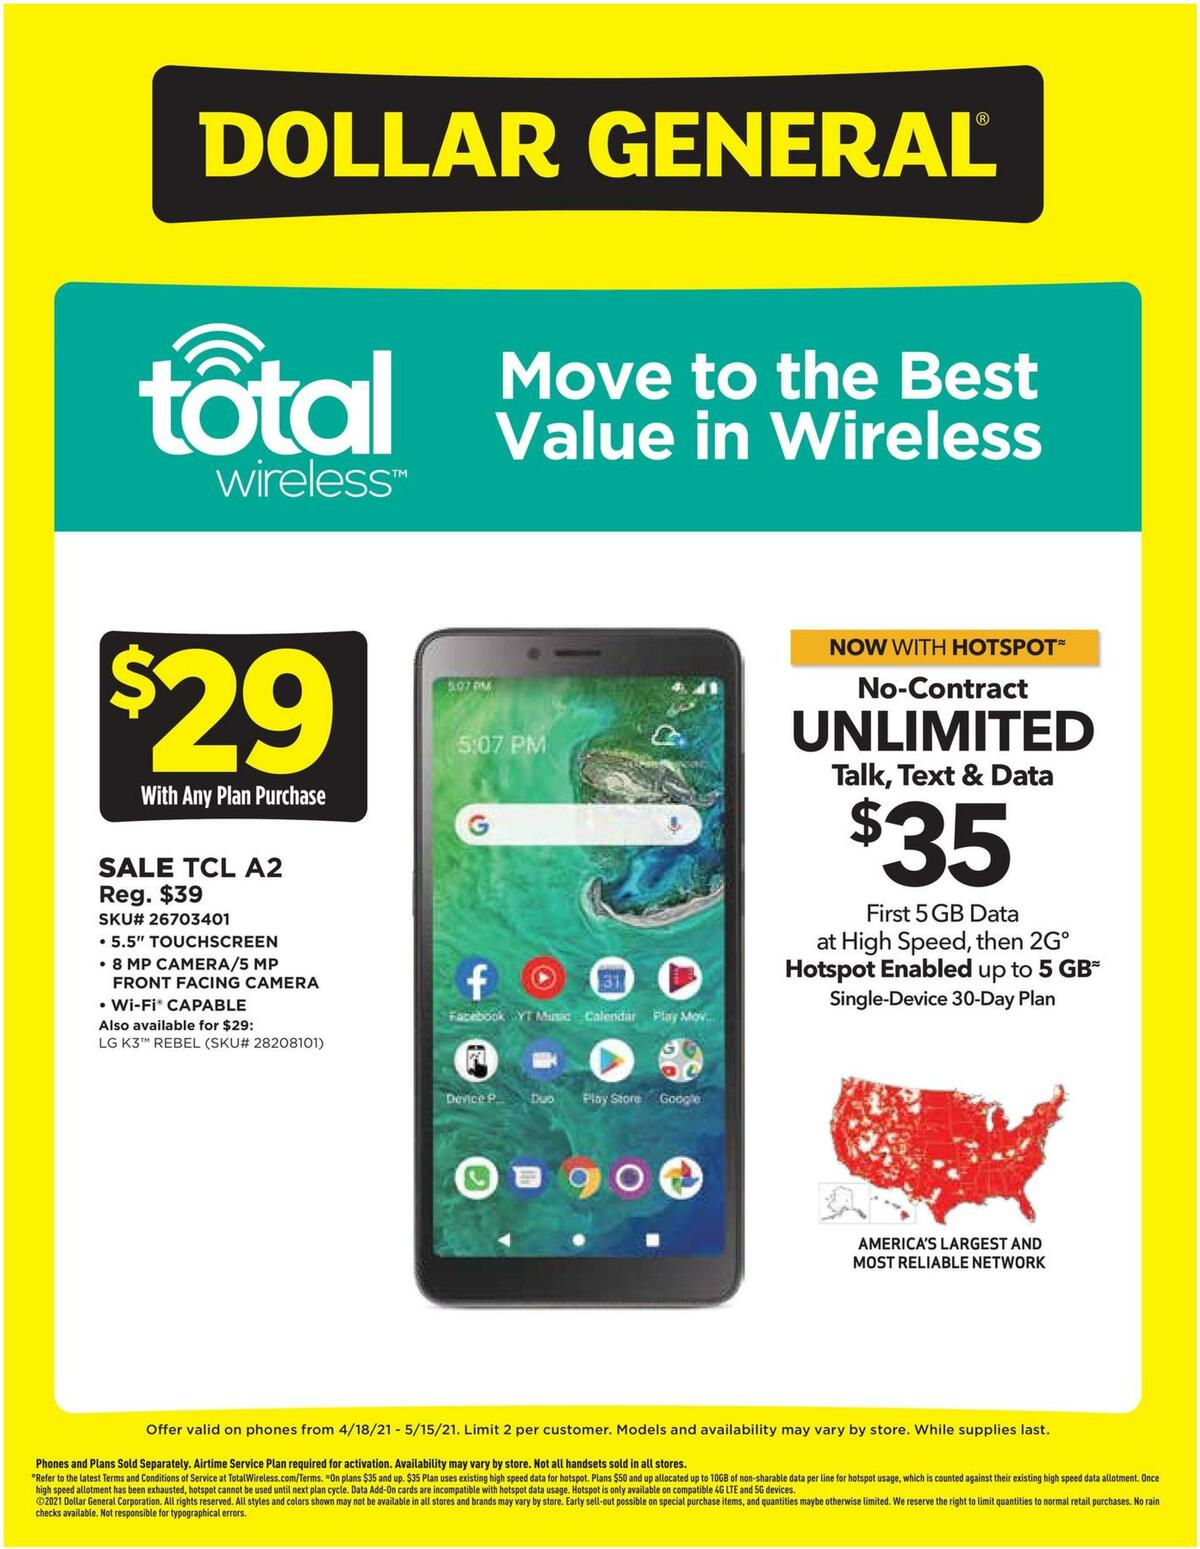 Dollar General Weekly Wireless Specials Weekly Ad from April 18